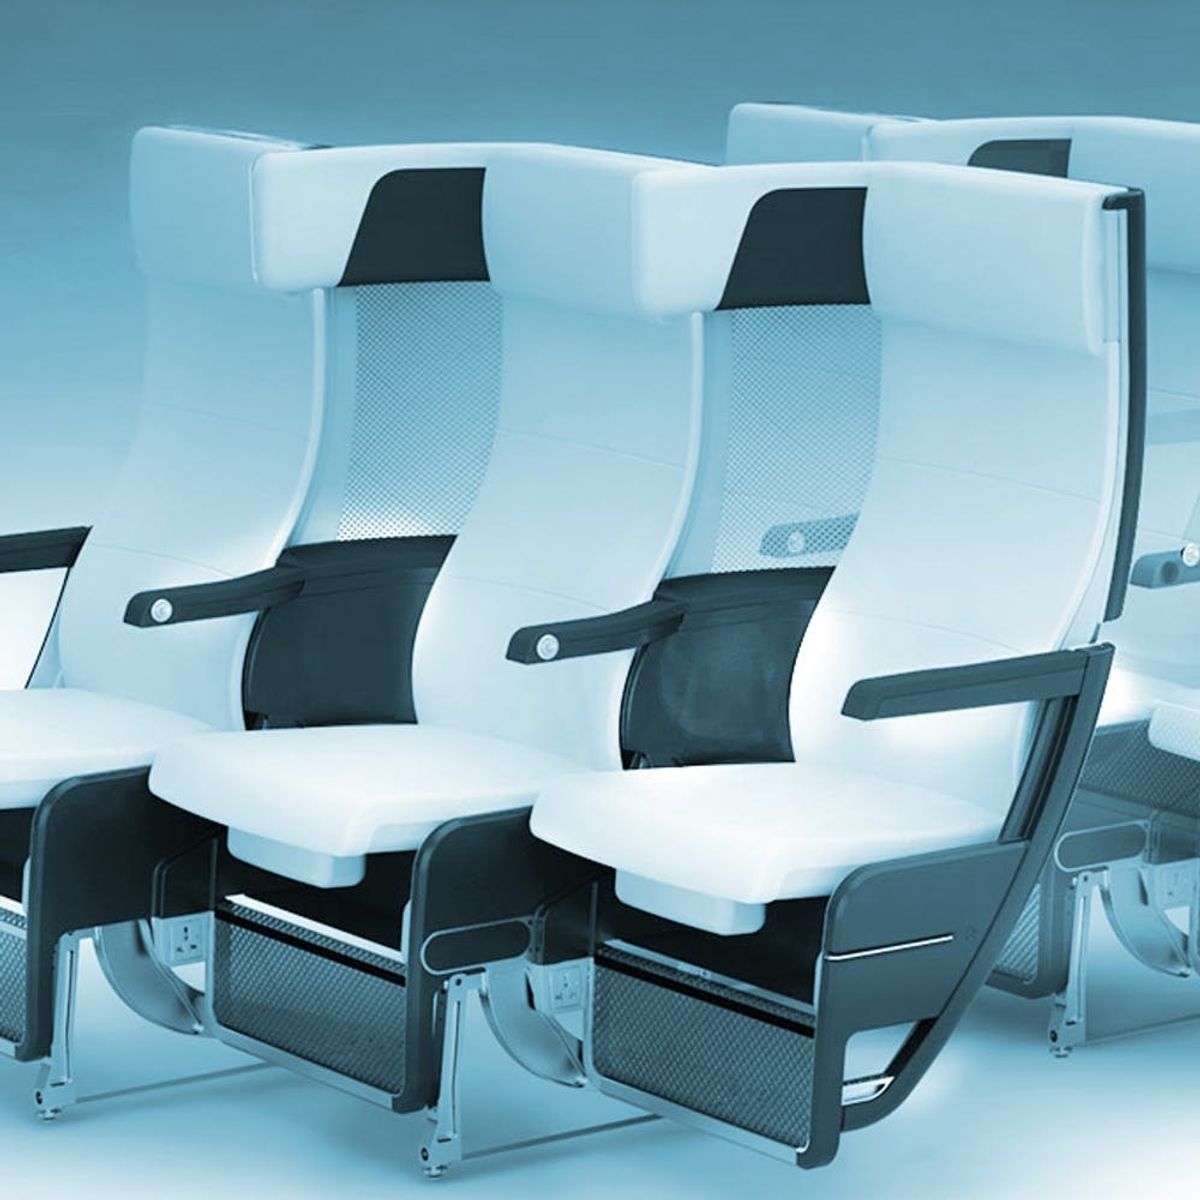 This New Design Could Make You Hate the Middle Seat Way Less